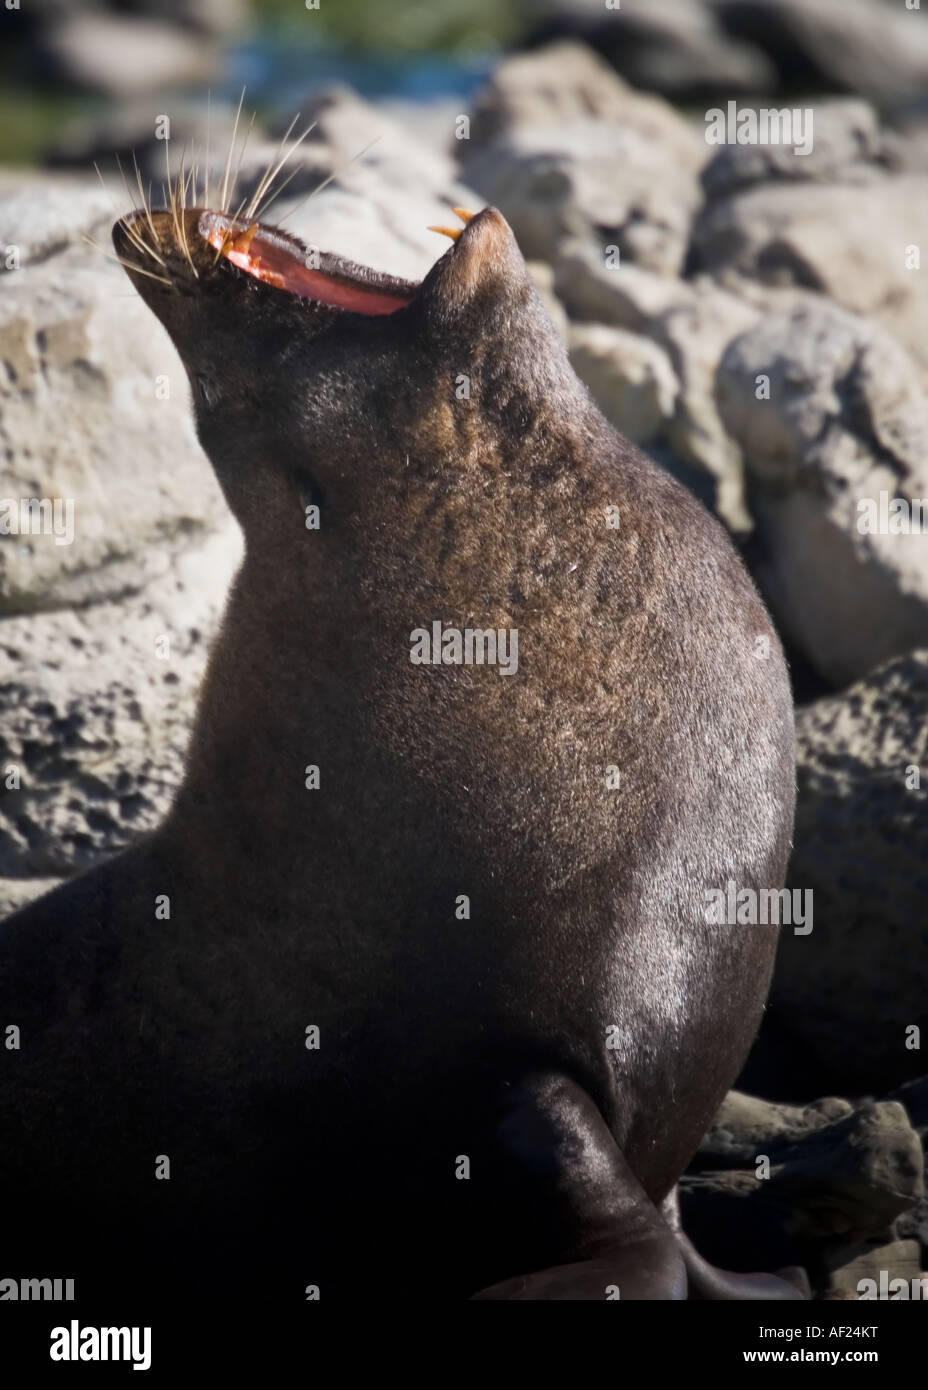 A brown fur seal yawning, surrounded by rocks on a sunny day, New Zealand Stock Photo